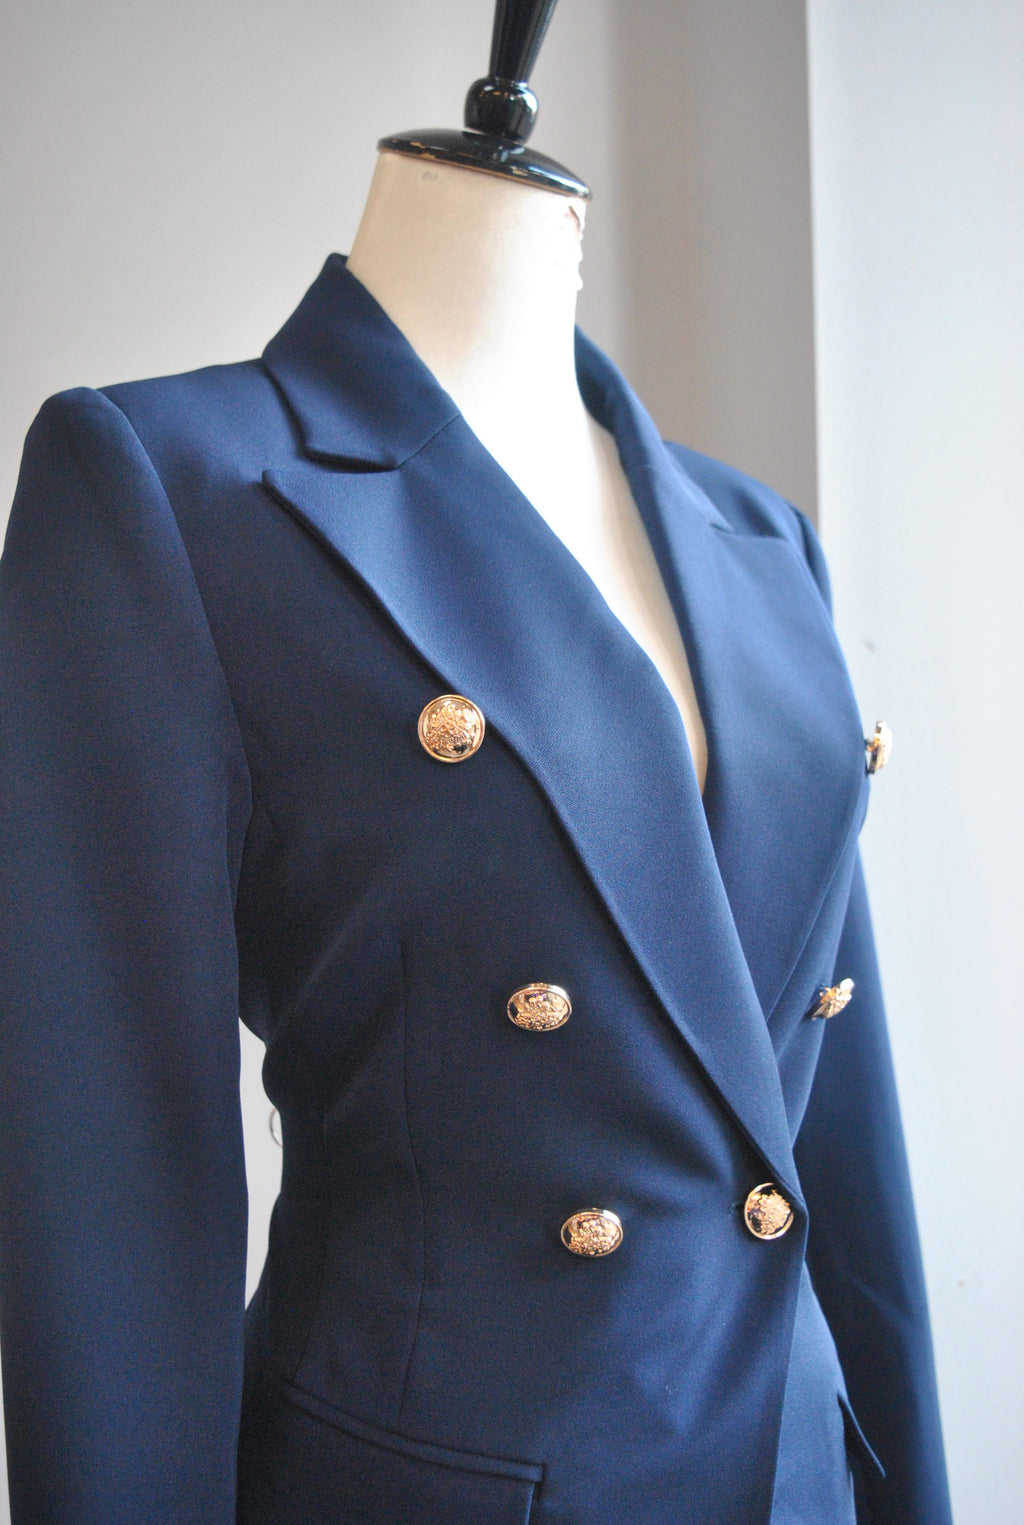 NAVY BLUE DOUBLE BREASTED BLAZER